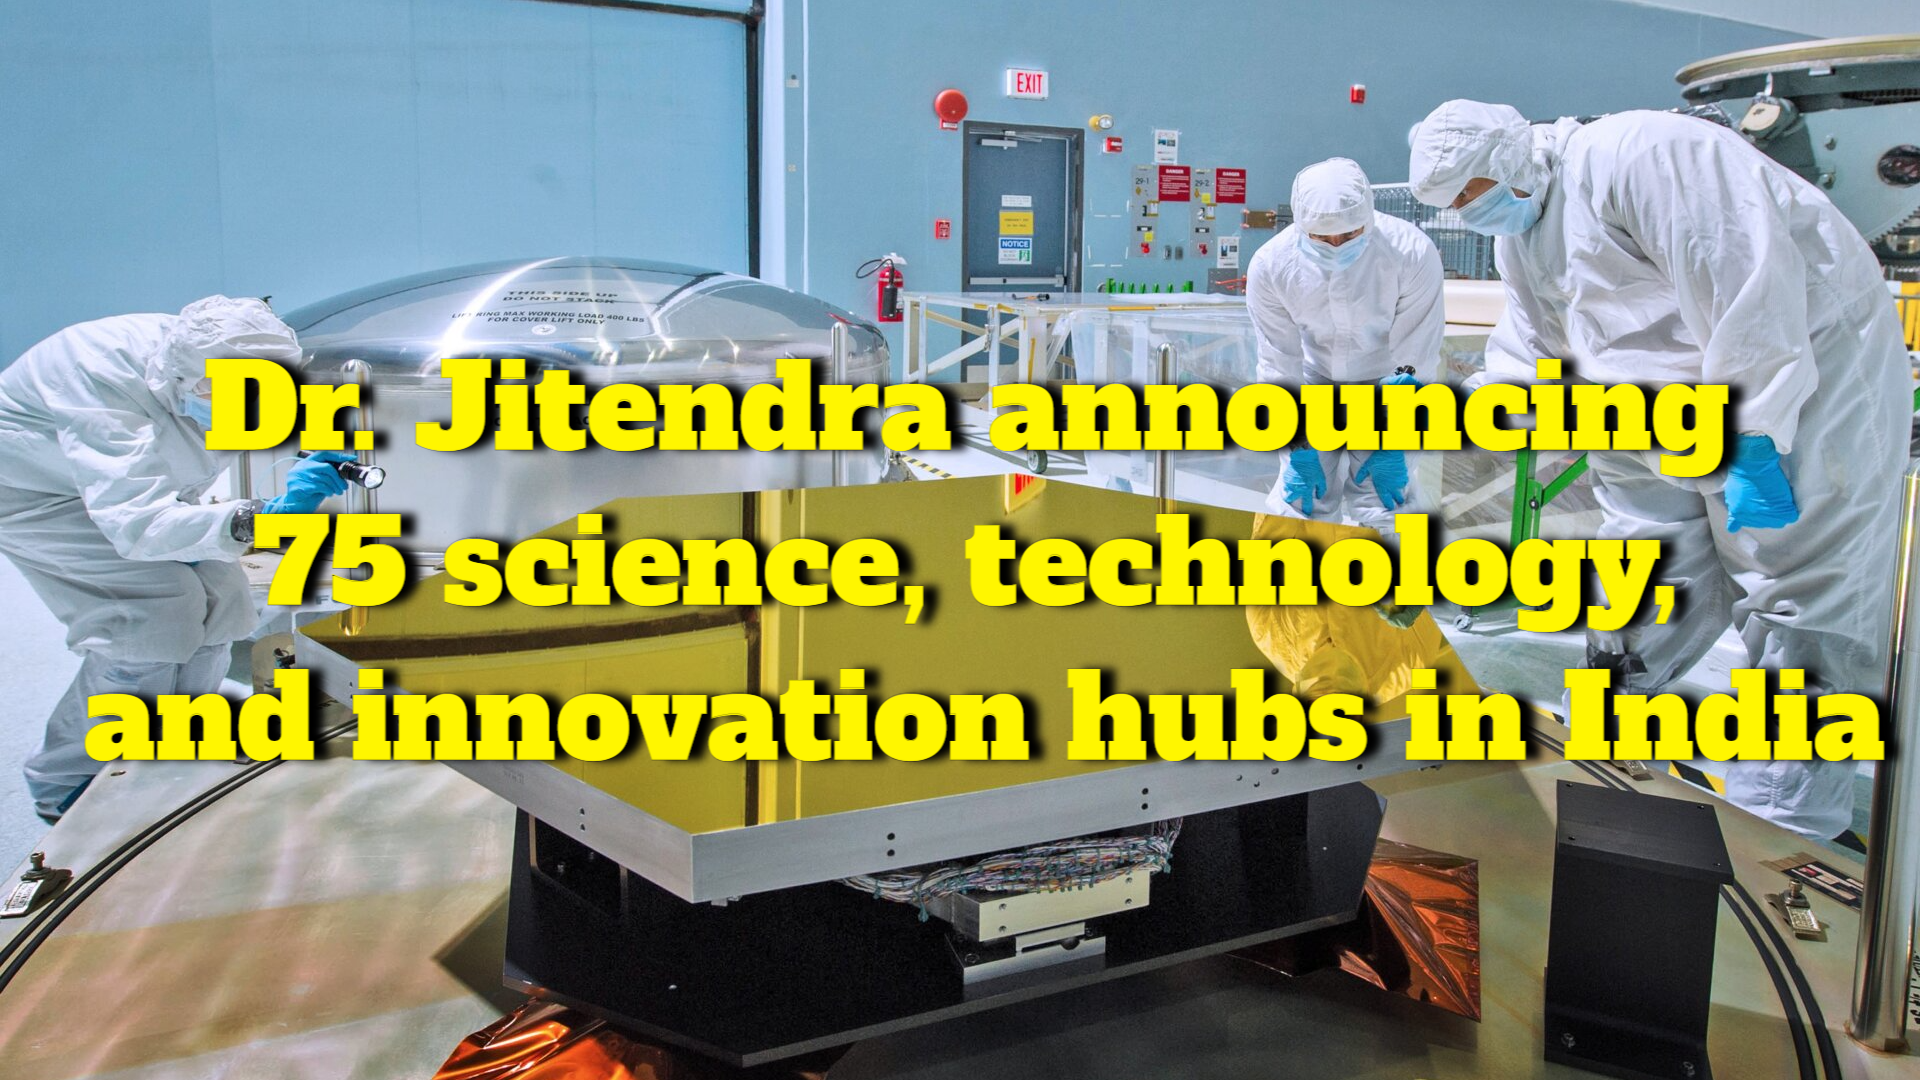 Setup 75 science, technology, and innovation hubs in India, Dr. Jitendra announces